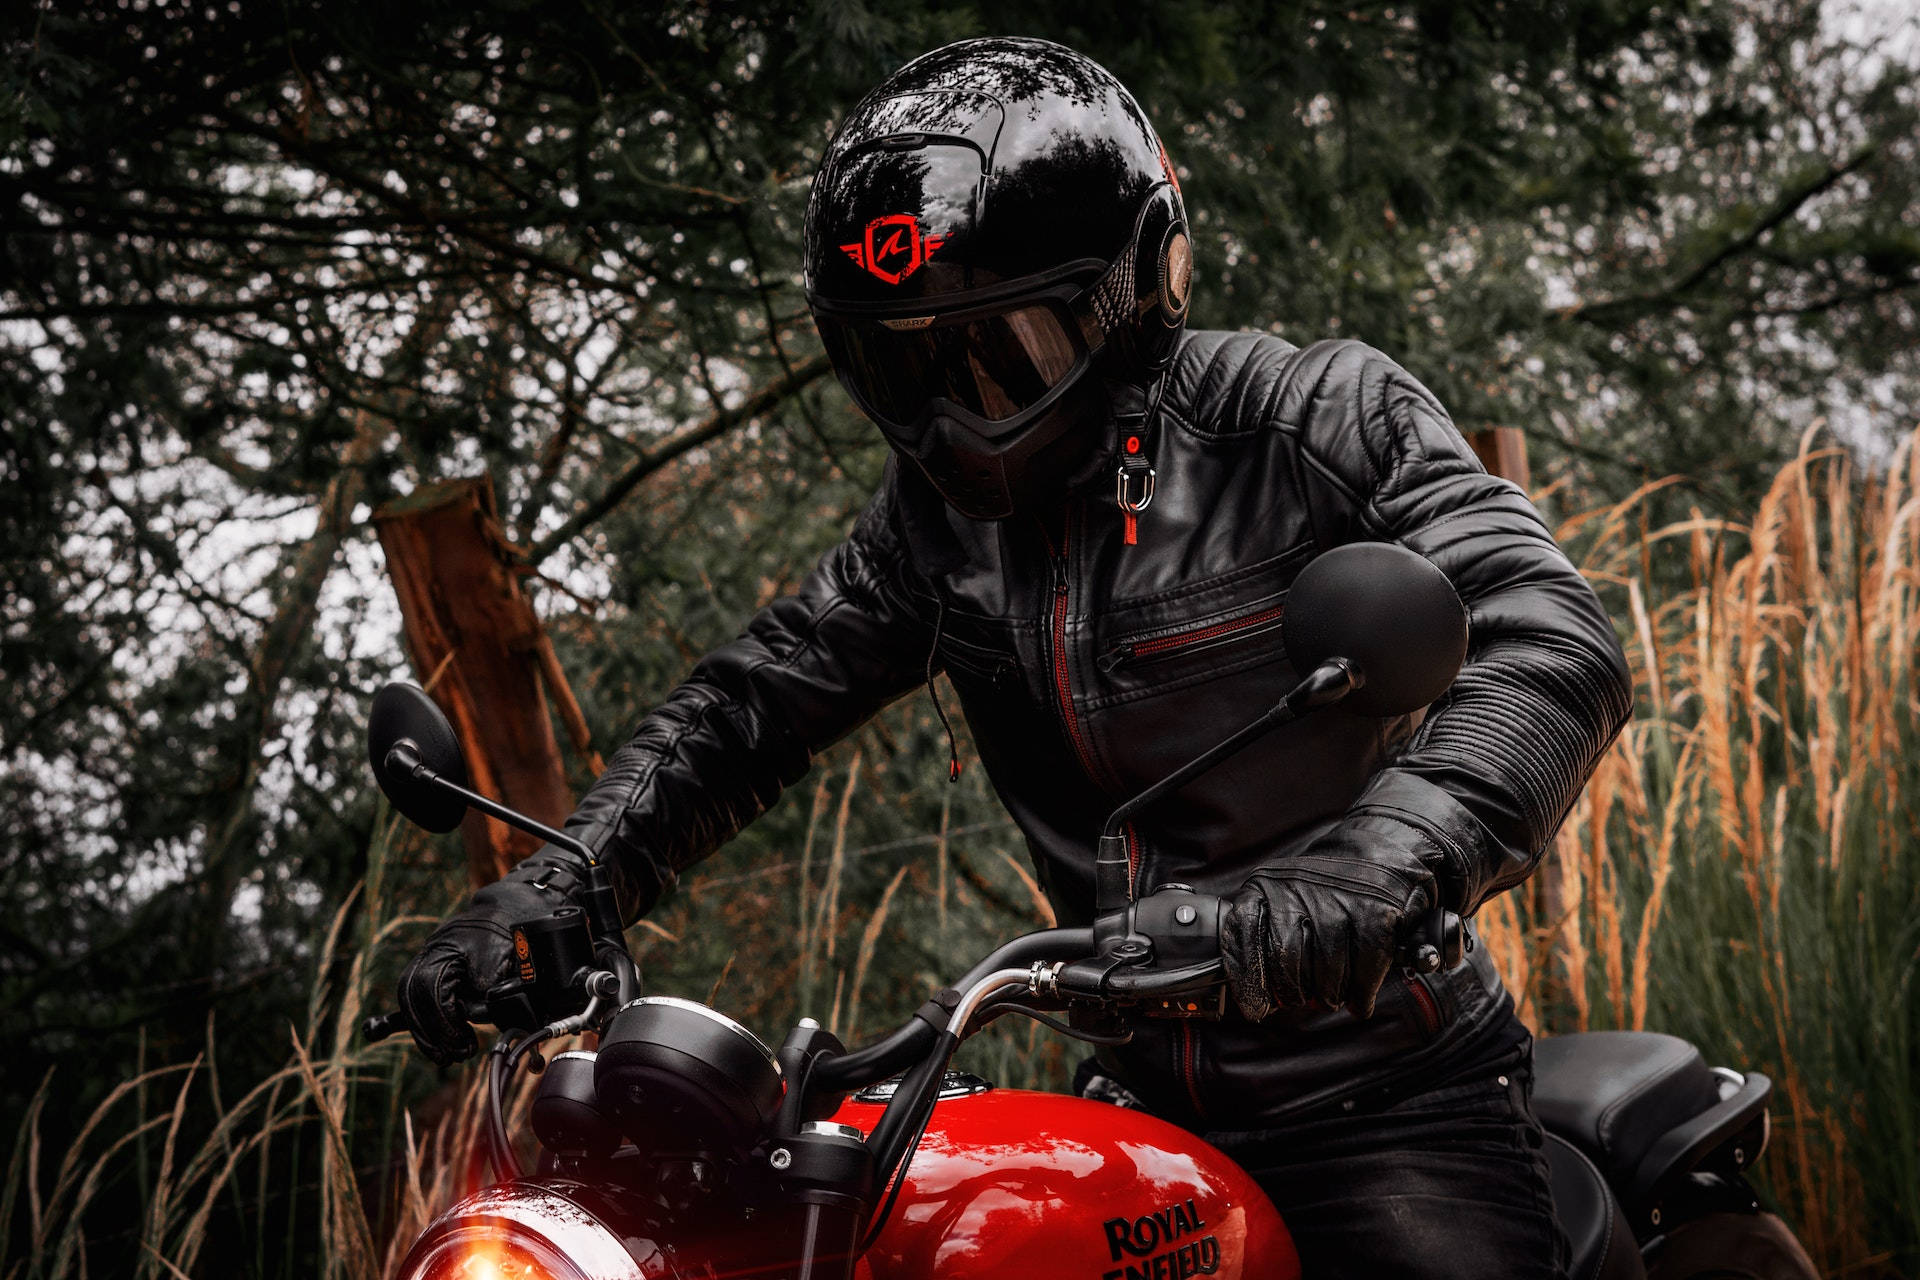 Bike Rider In Black And Red Wallpaper